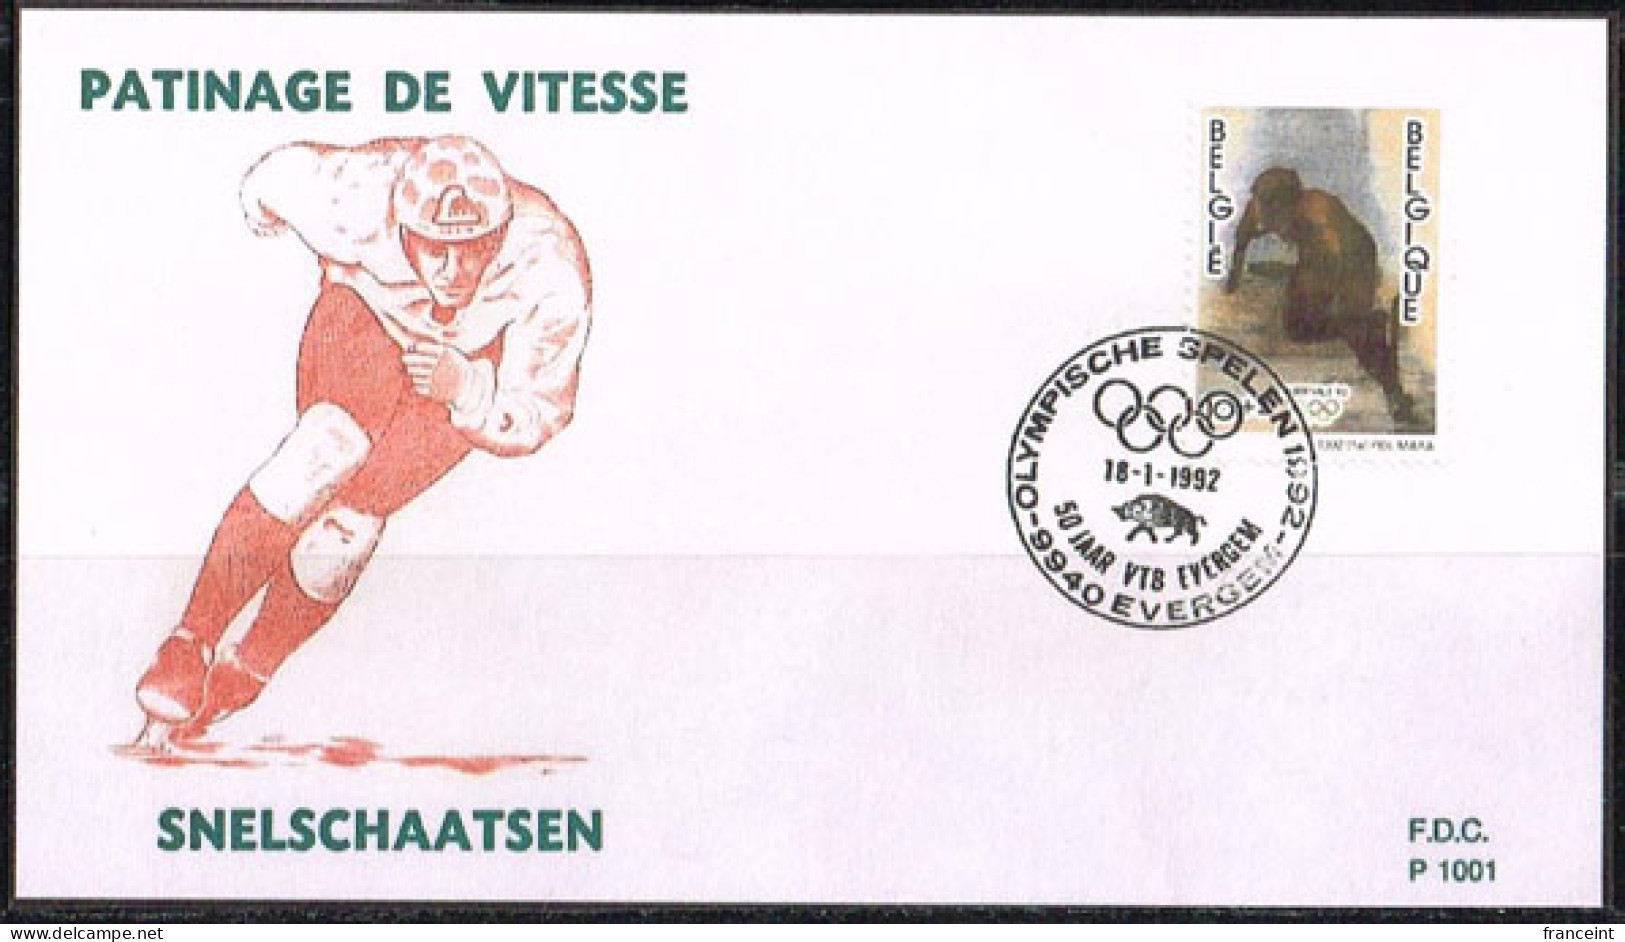 BELGIUM(1992) Speed Skating. Die Proof In Black Signed By The Engraver, Representing The FDC Cachet. Scott No B1101. - Proeven & Herdruk